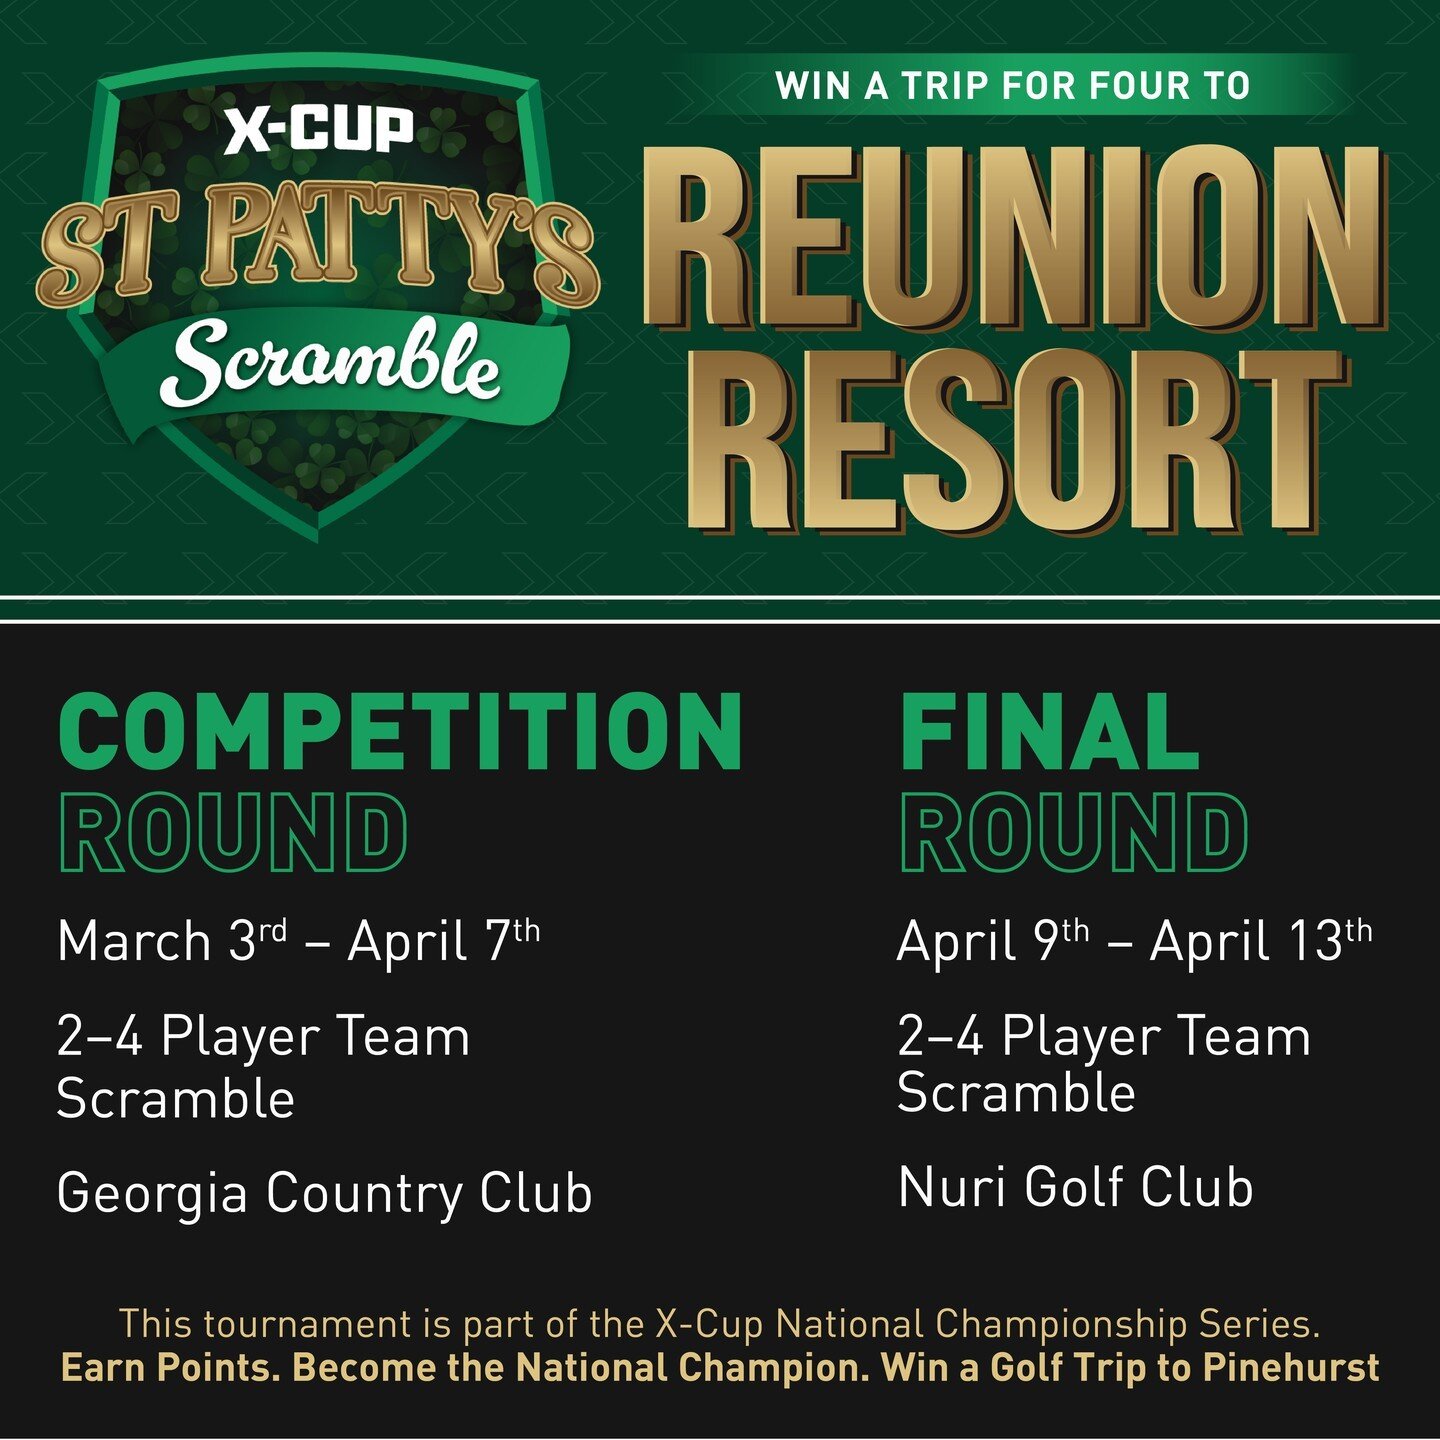 Luck favors the bold at the X-Cup St. Patty's Scramble! 🏆🍀 Secure your spot now and compete for a chance to win an epic trip for four to Reunion Resort. Don't miss out&mdash;register today!

#XGolf #StPattysScramble #IndoorGolf #XCup